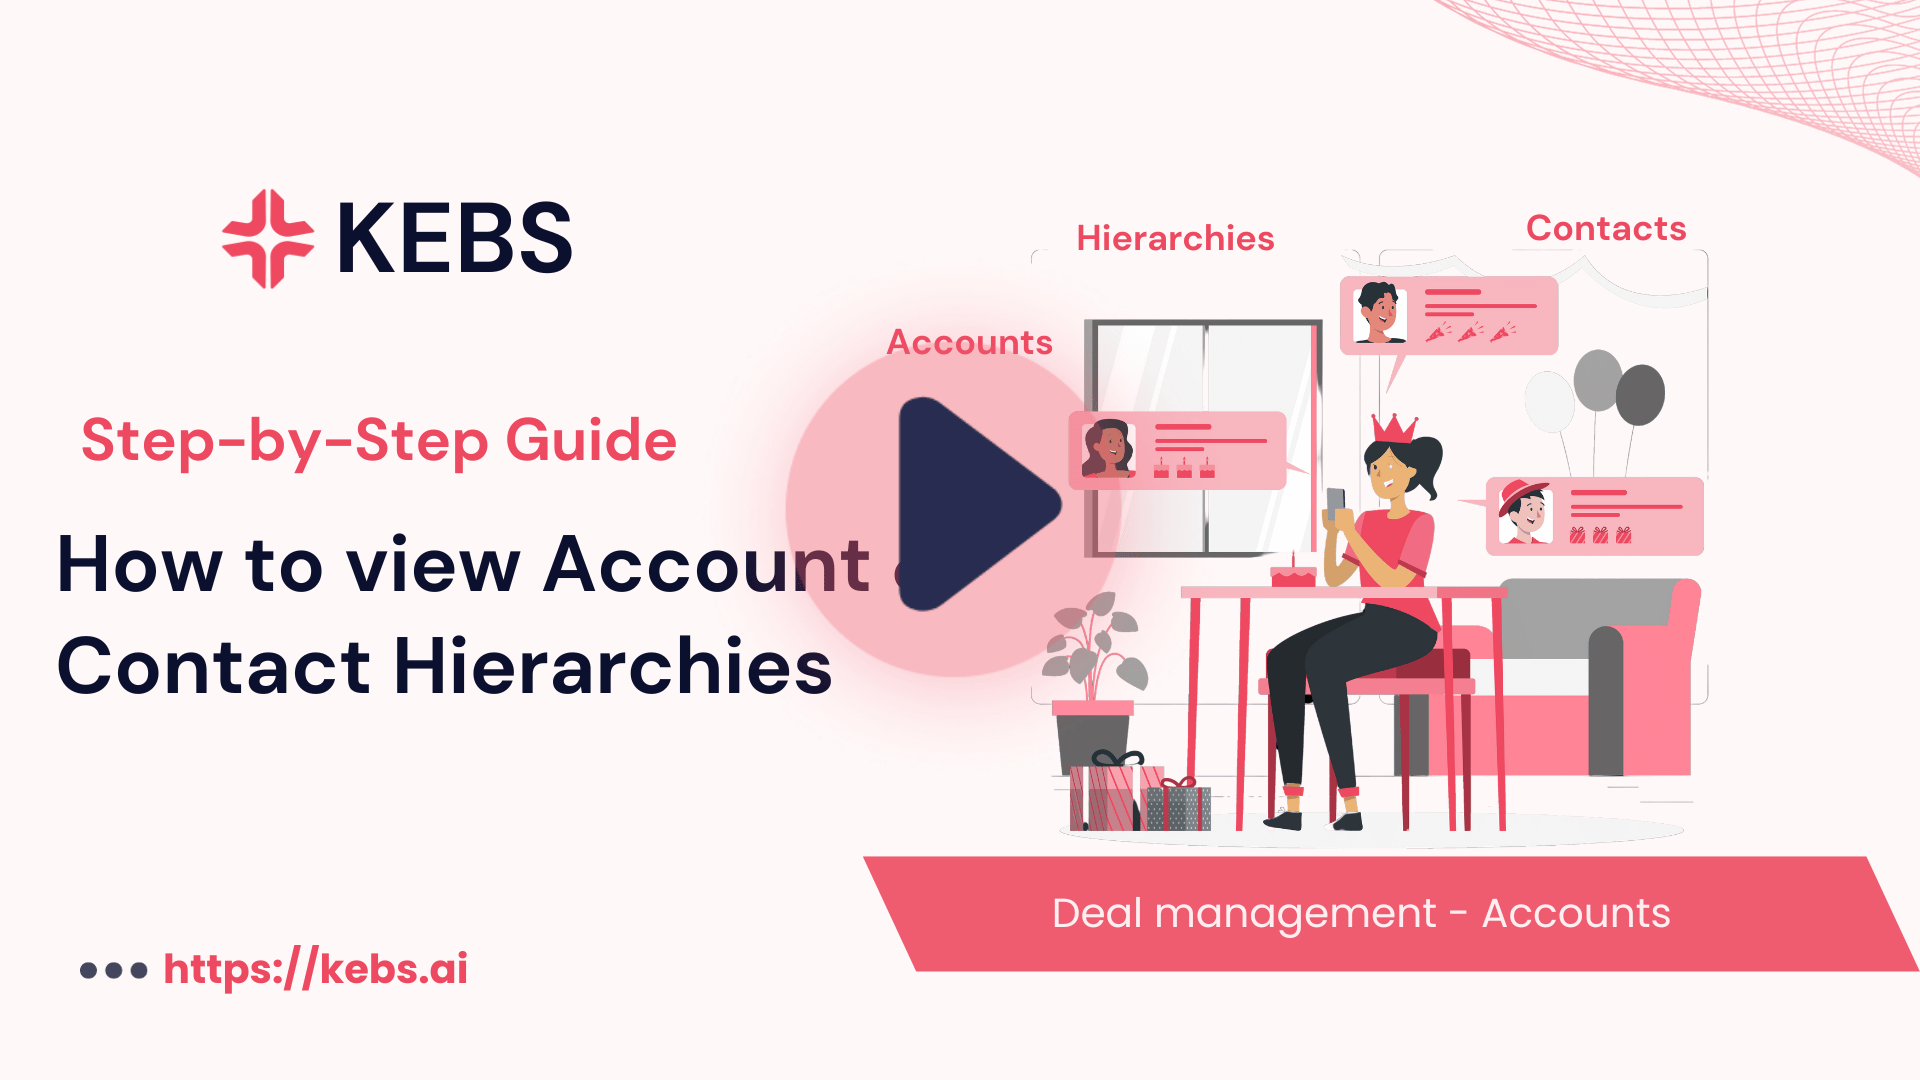 How to view Account & Contact Hierarchies